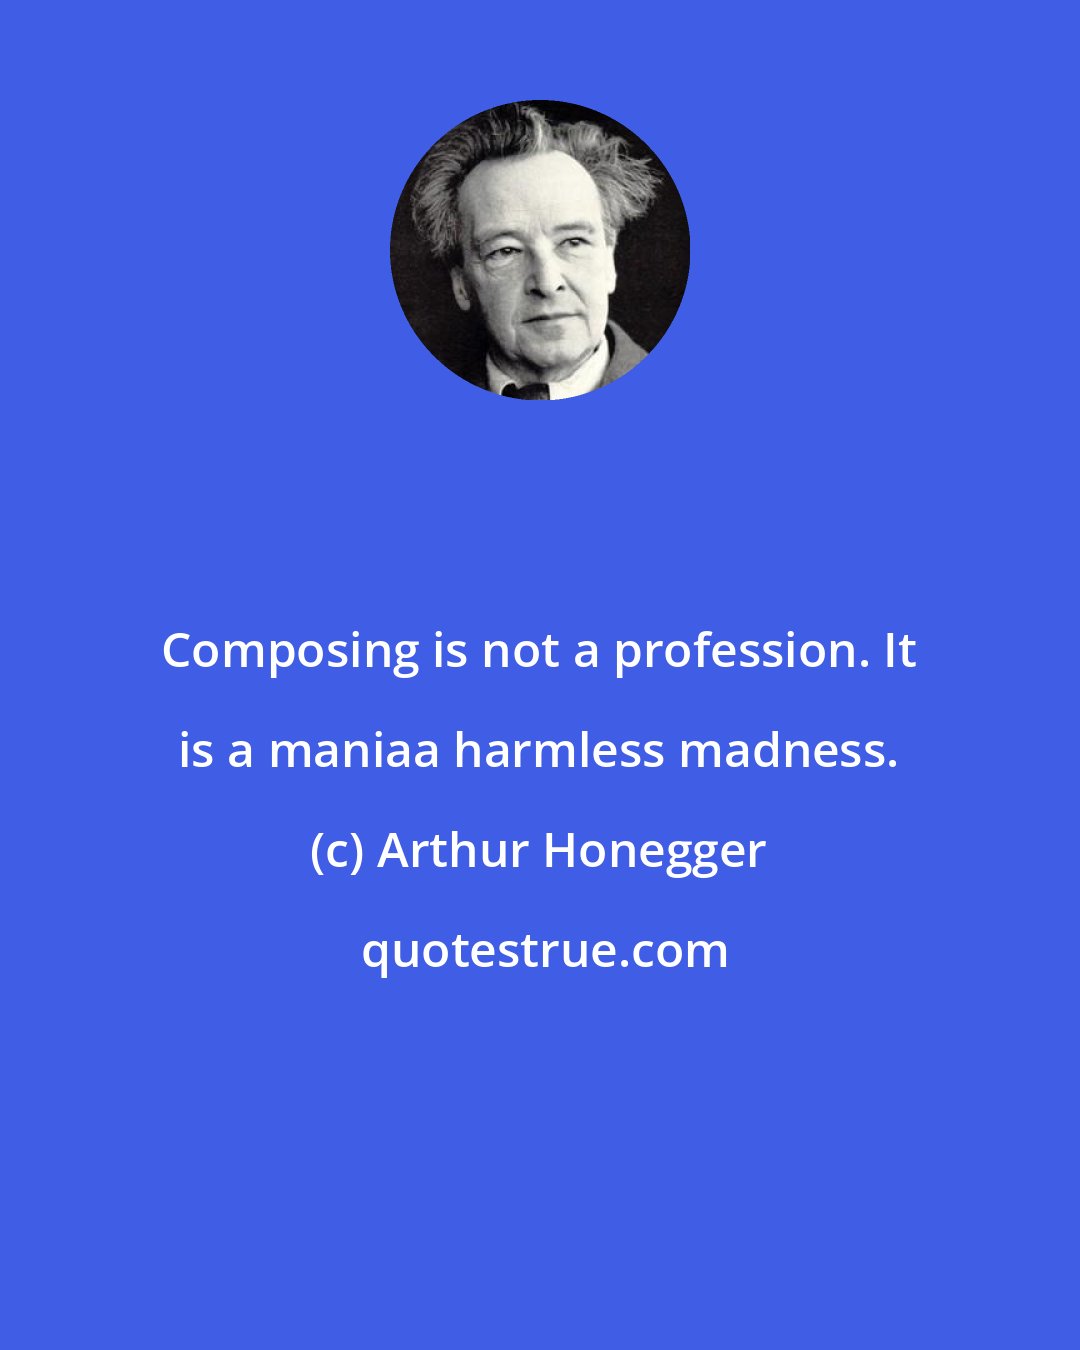 Arthur Honegger: Composing is not a profession. It is a maniaa harmless madness.